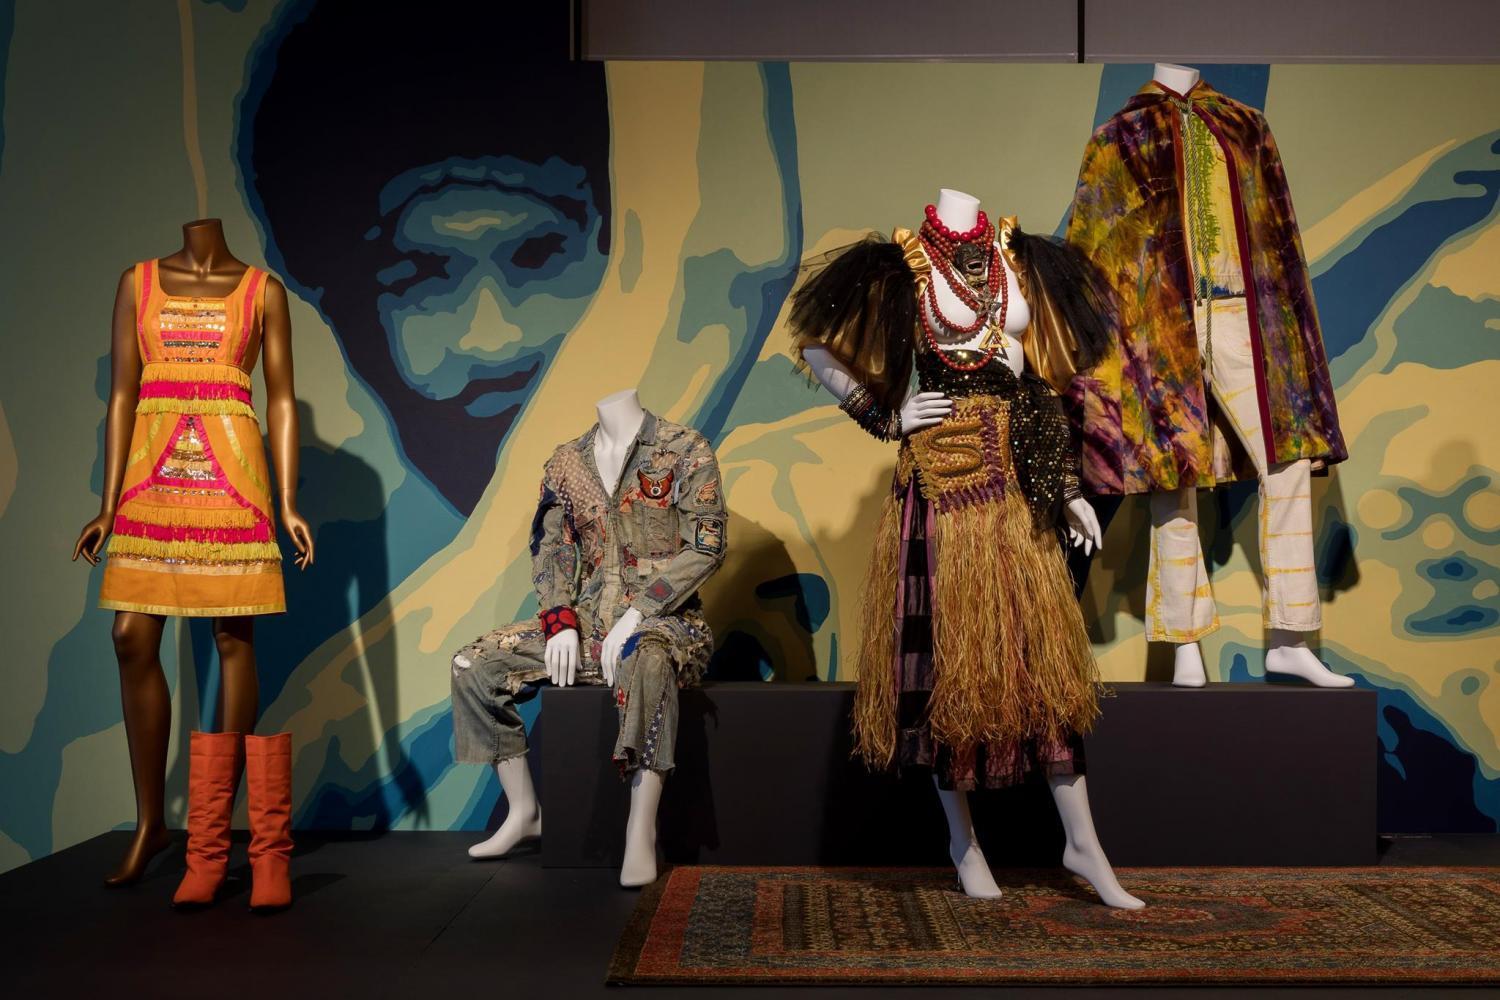 The Counter-Couture: Handmade Fashion in an American Counterculture exhibit, on display at the Museum of Art and Design through August 20. As the summer approaches, a number of fashion museum exhibits are appearing around the city.